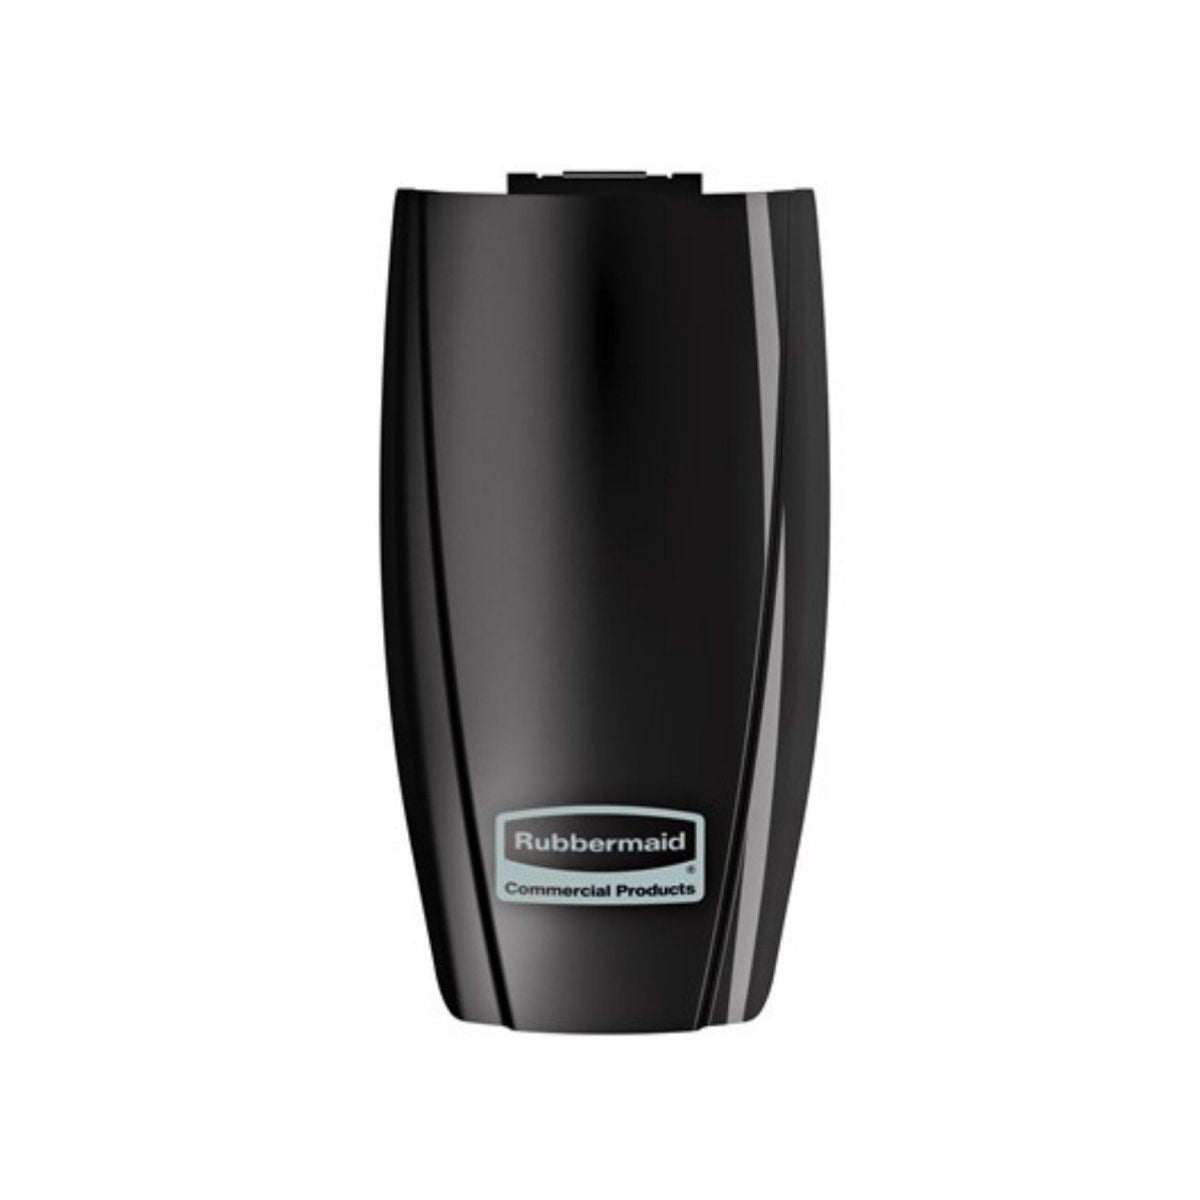 Rubbermaid TCell™ Air Freshener Dispenser